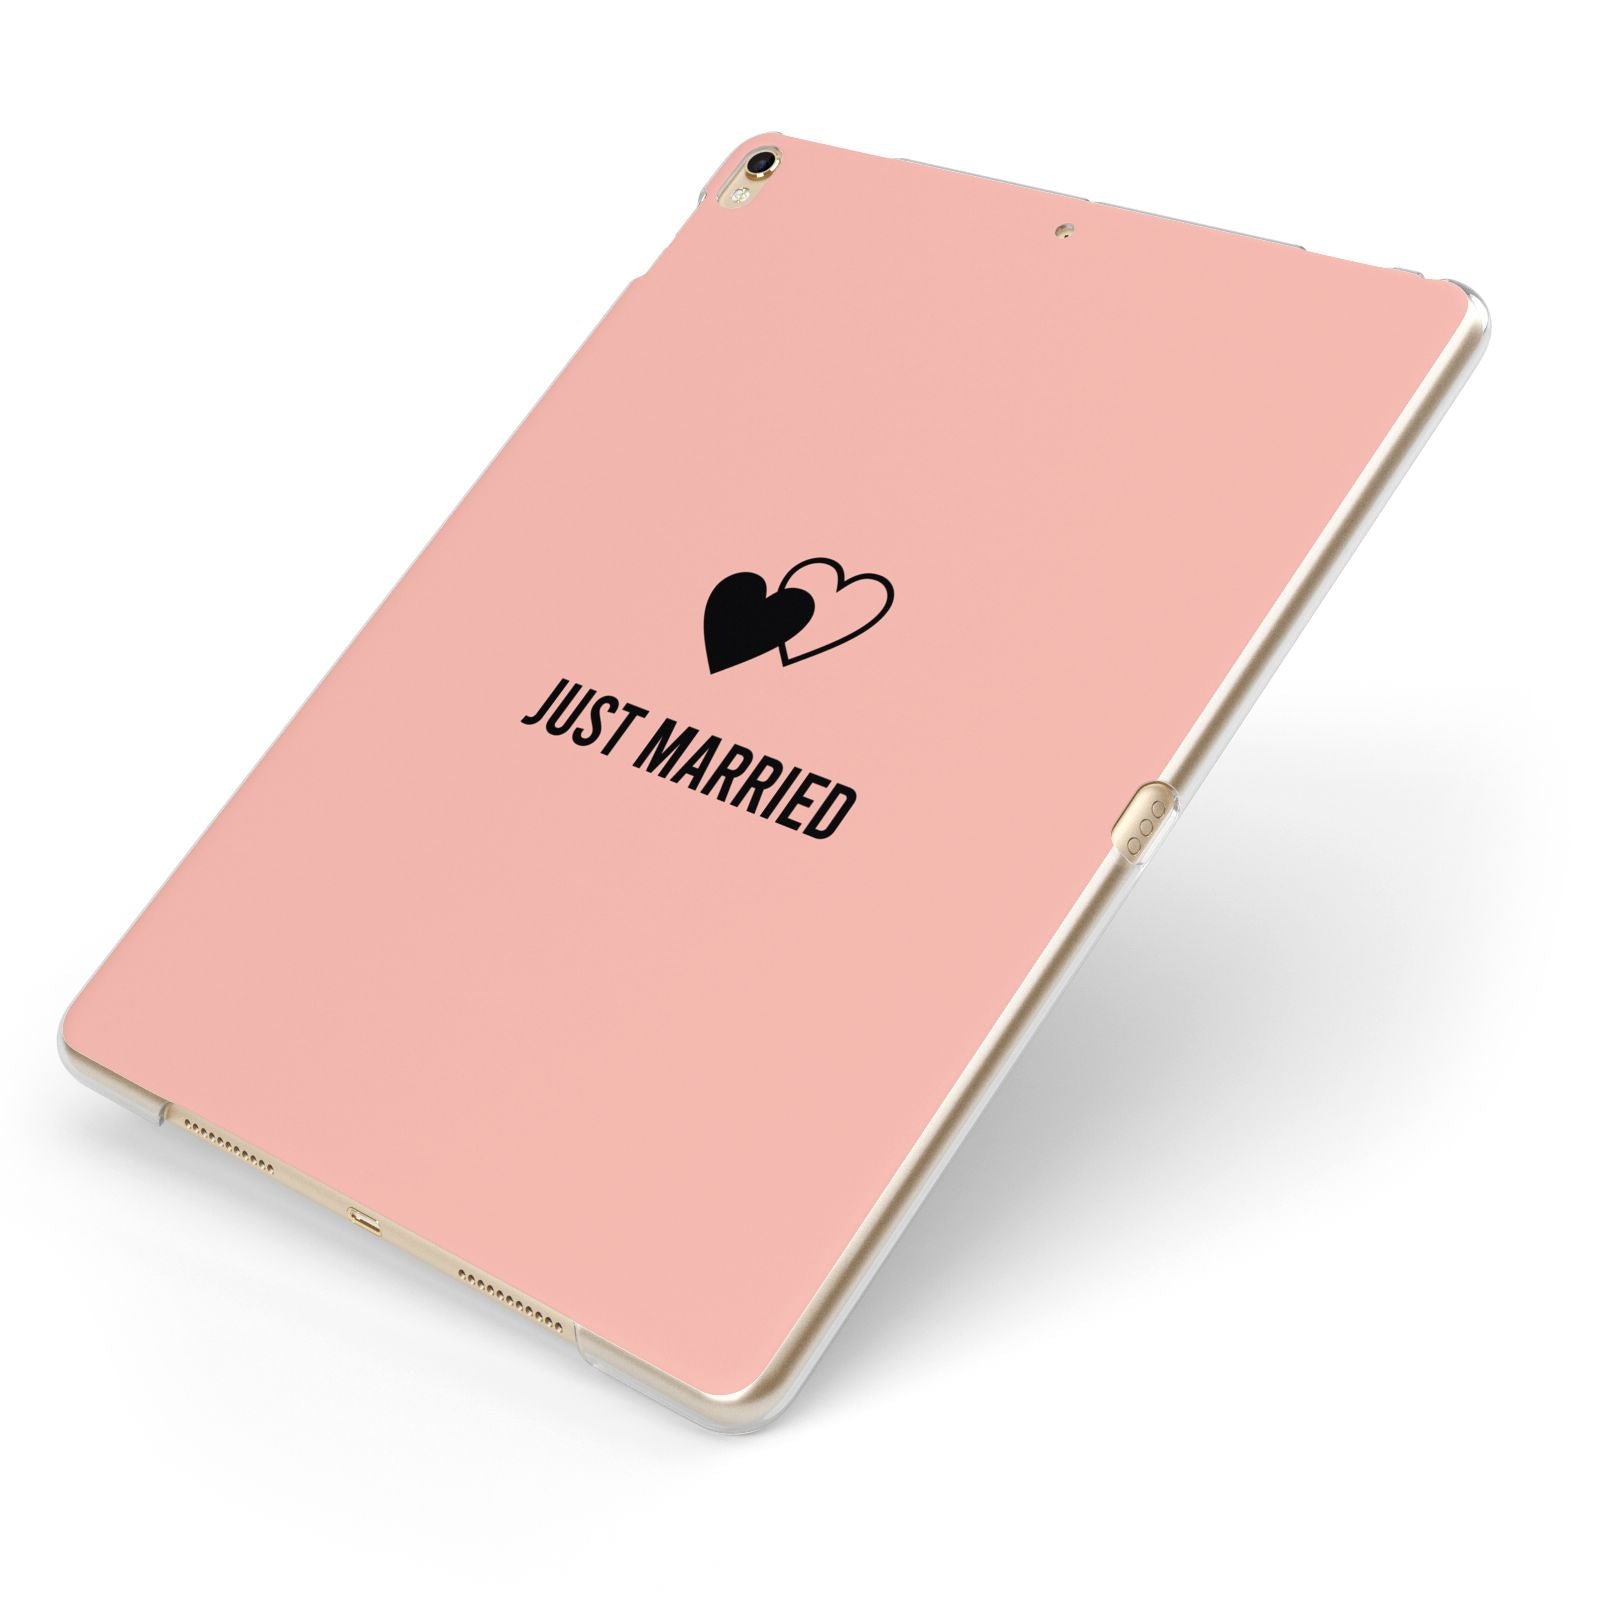 Just Married Apple iPad Case on Gold iPad Side View